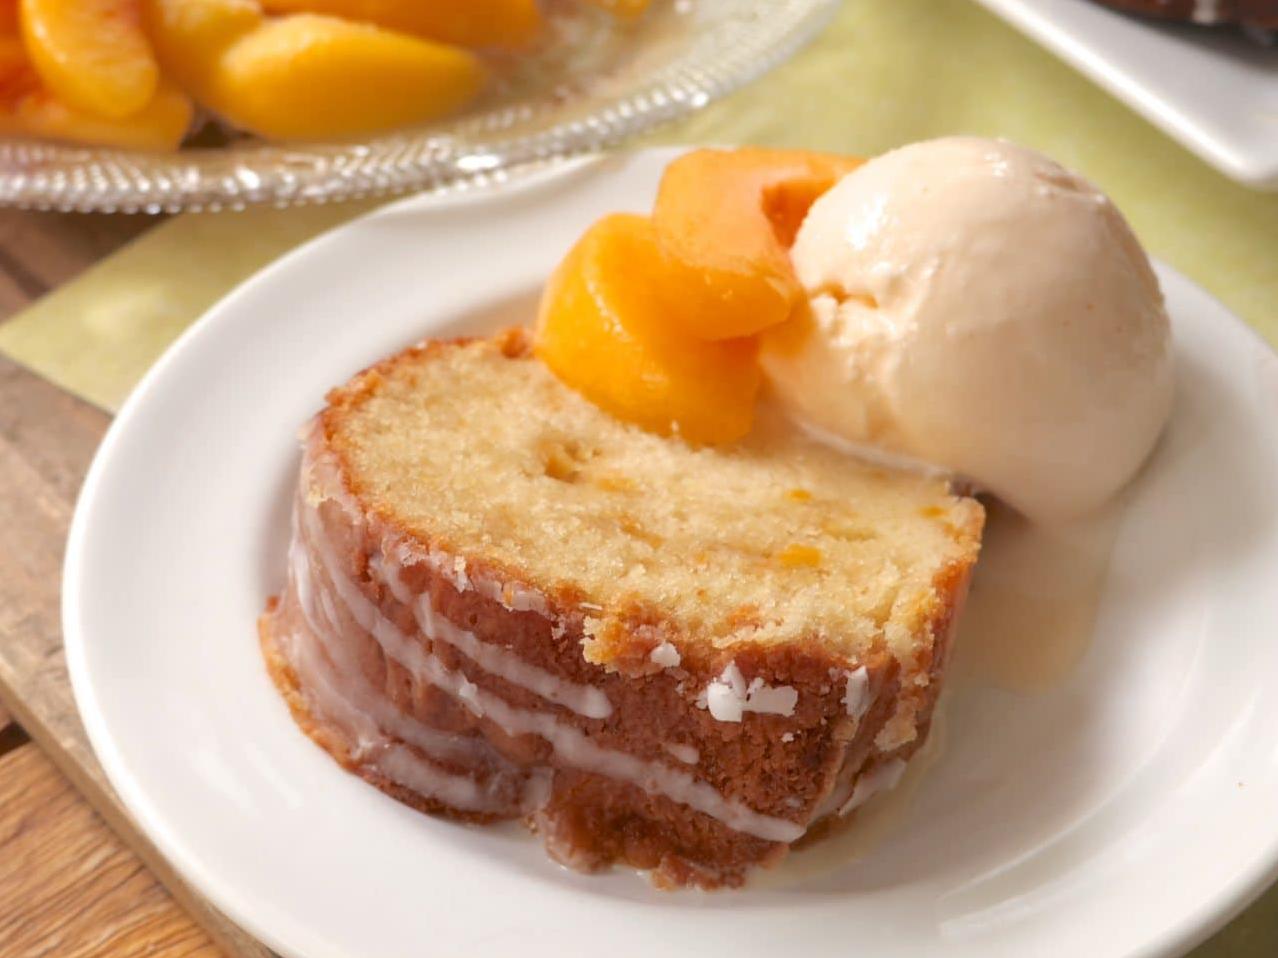  Every slice is packed with juicy, ripe peaches for a burst of flavor.